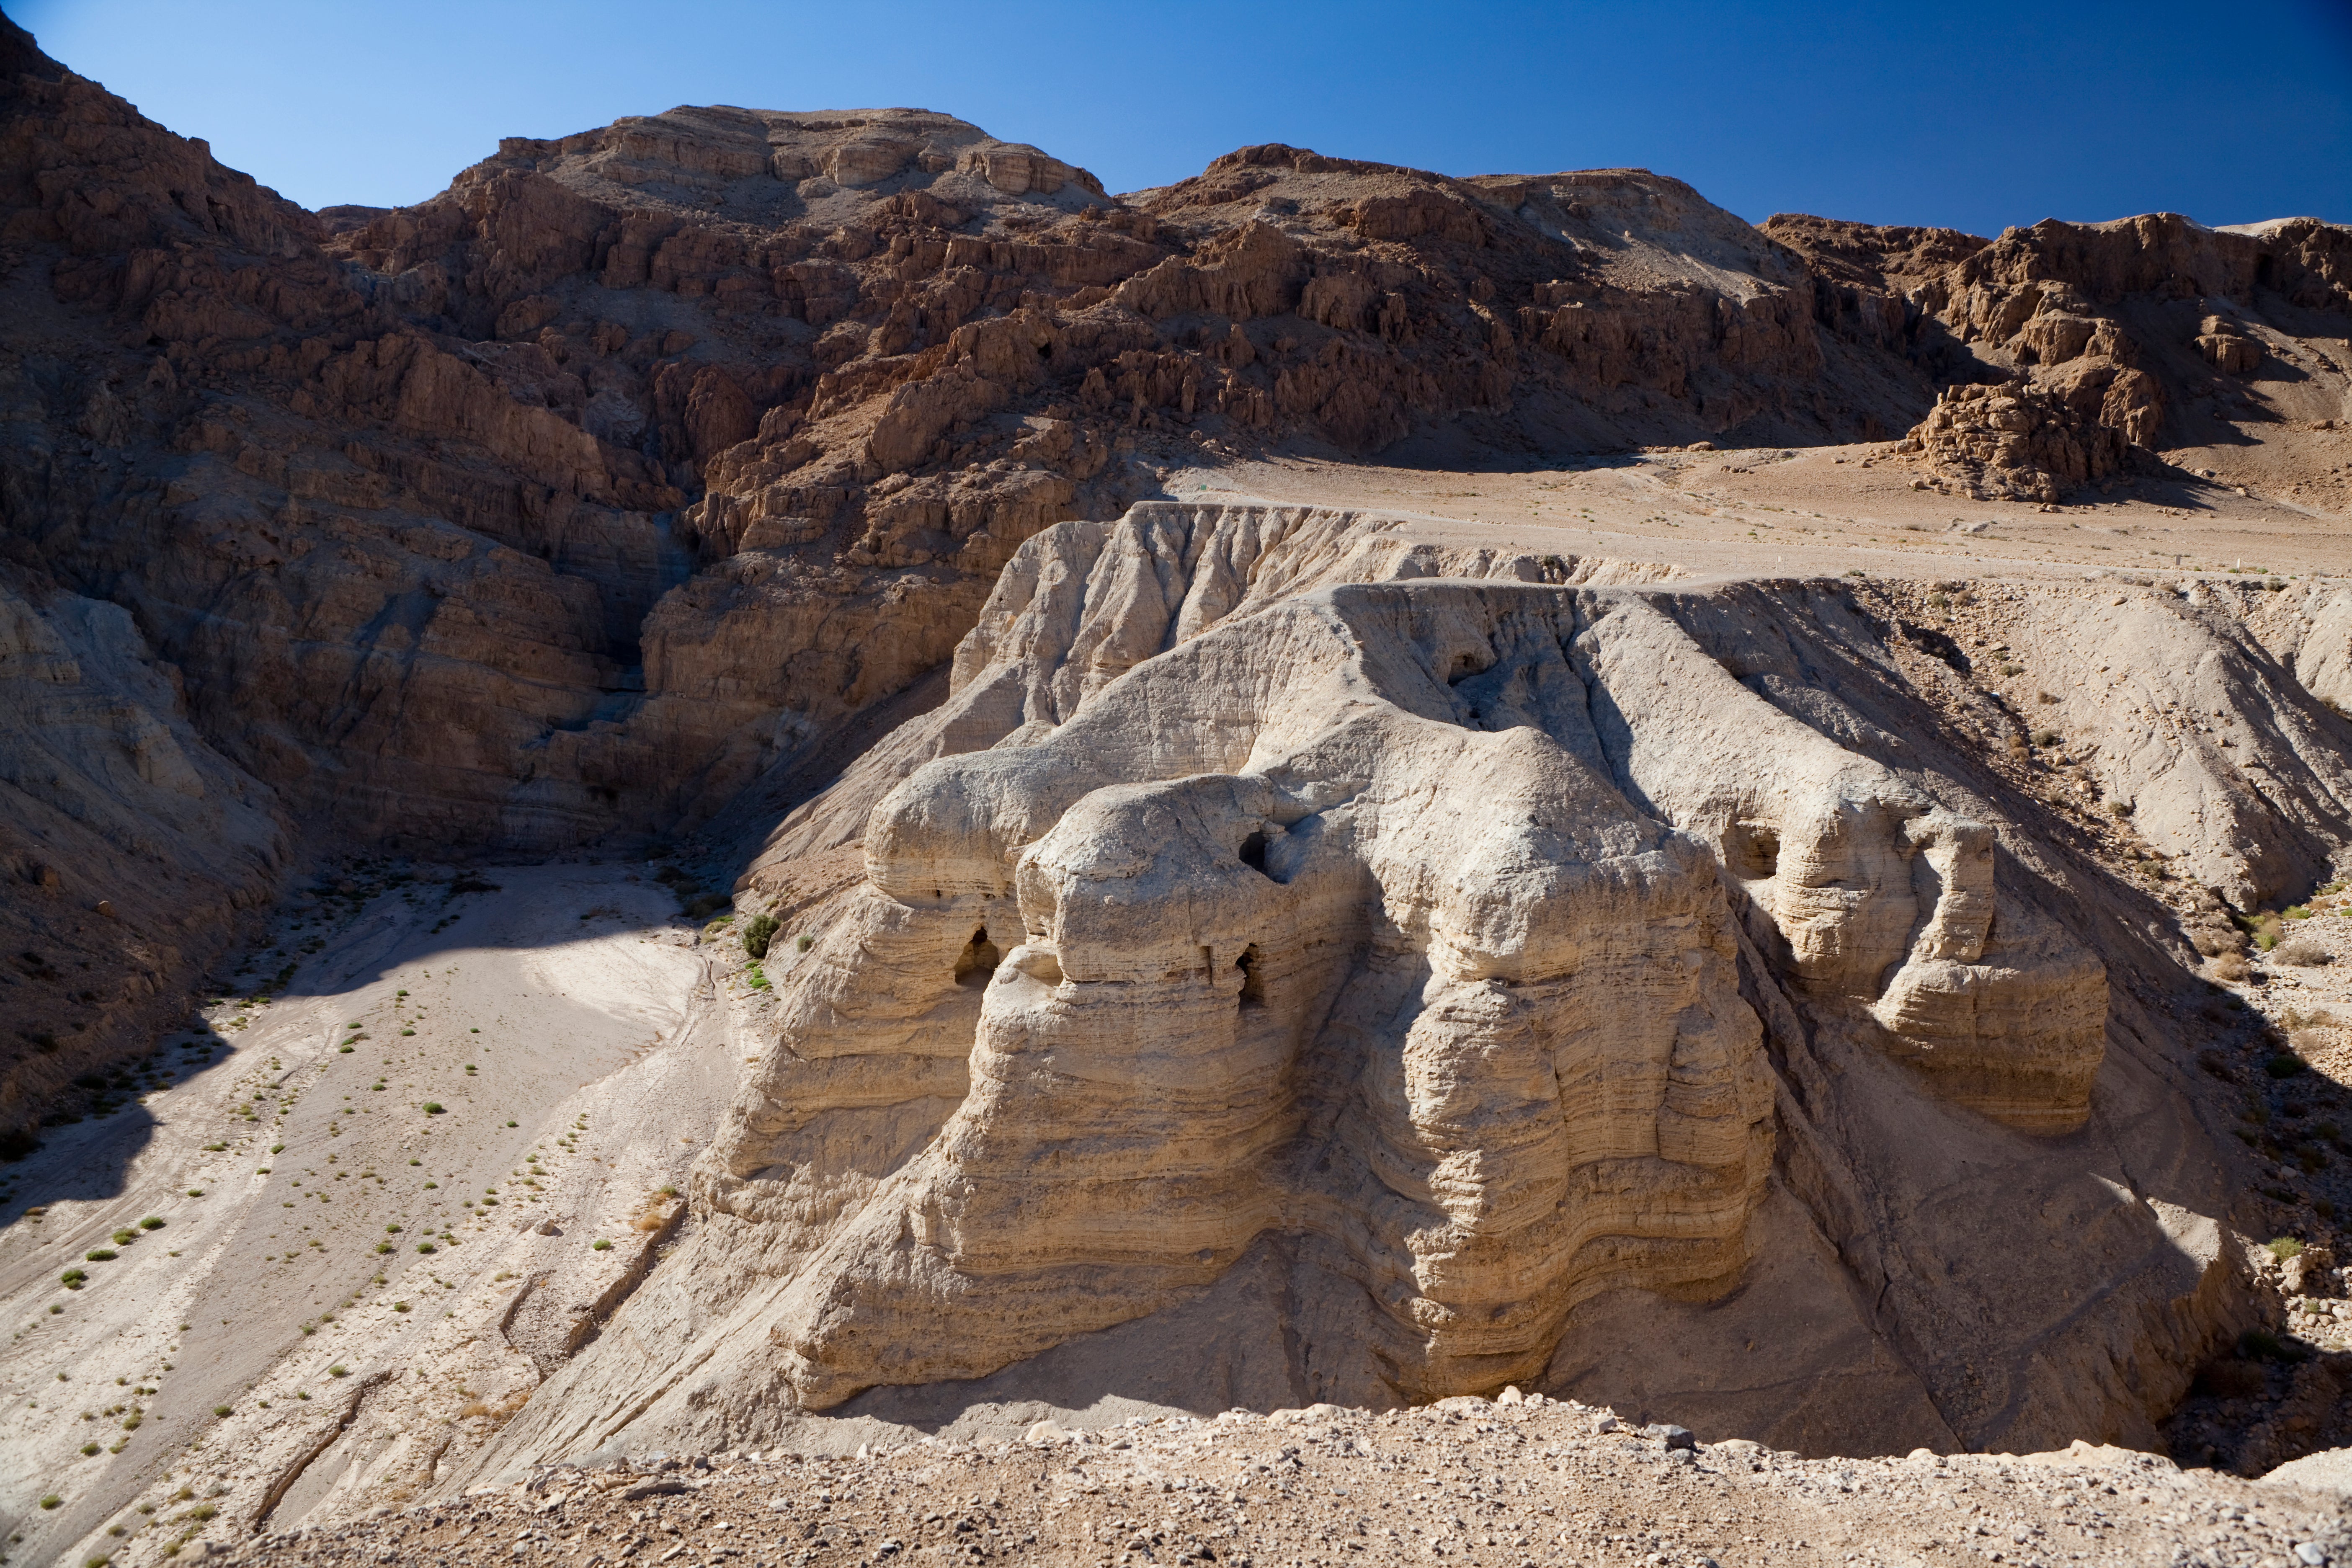 The caves of Qumran, on the edge of the Dead Sea in Israel